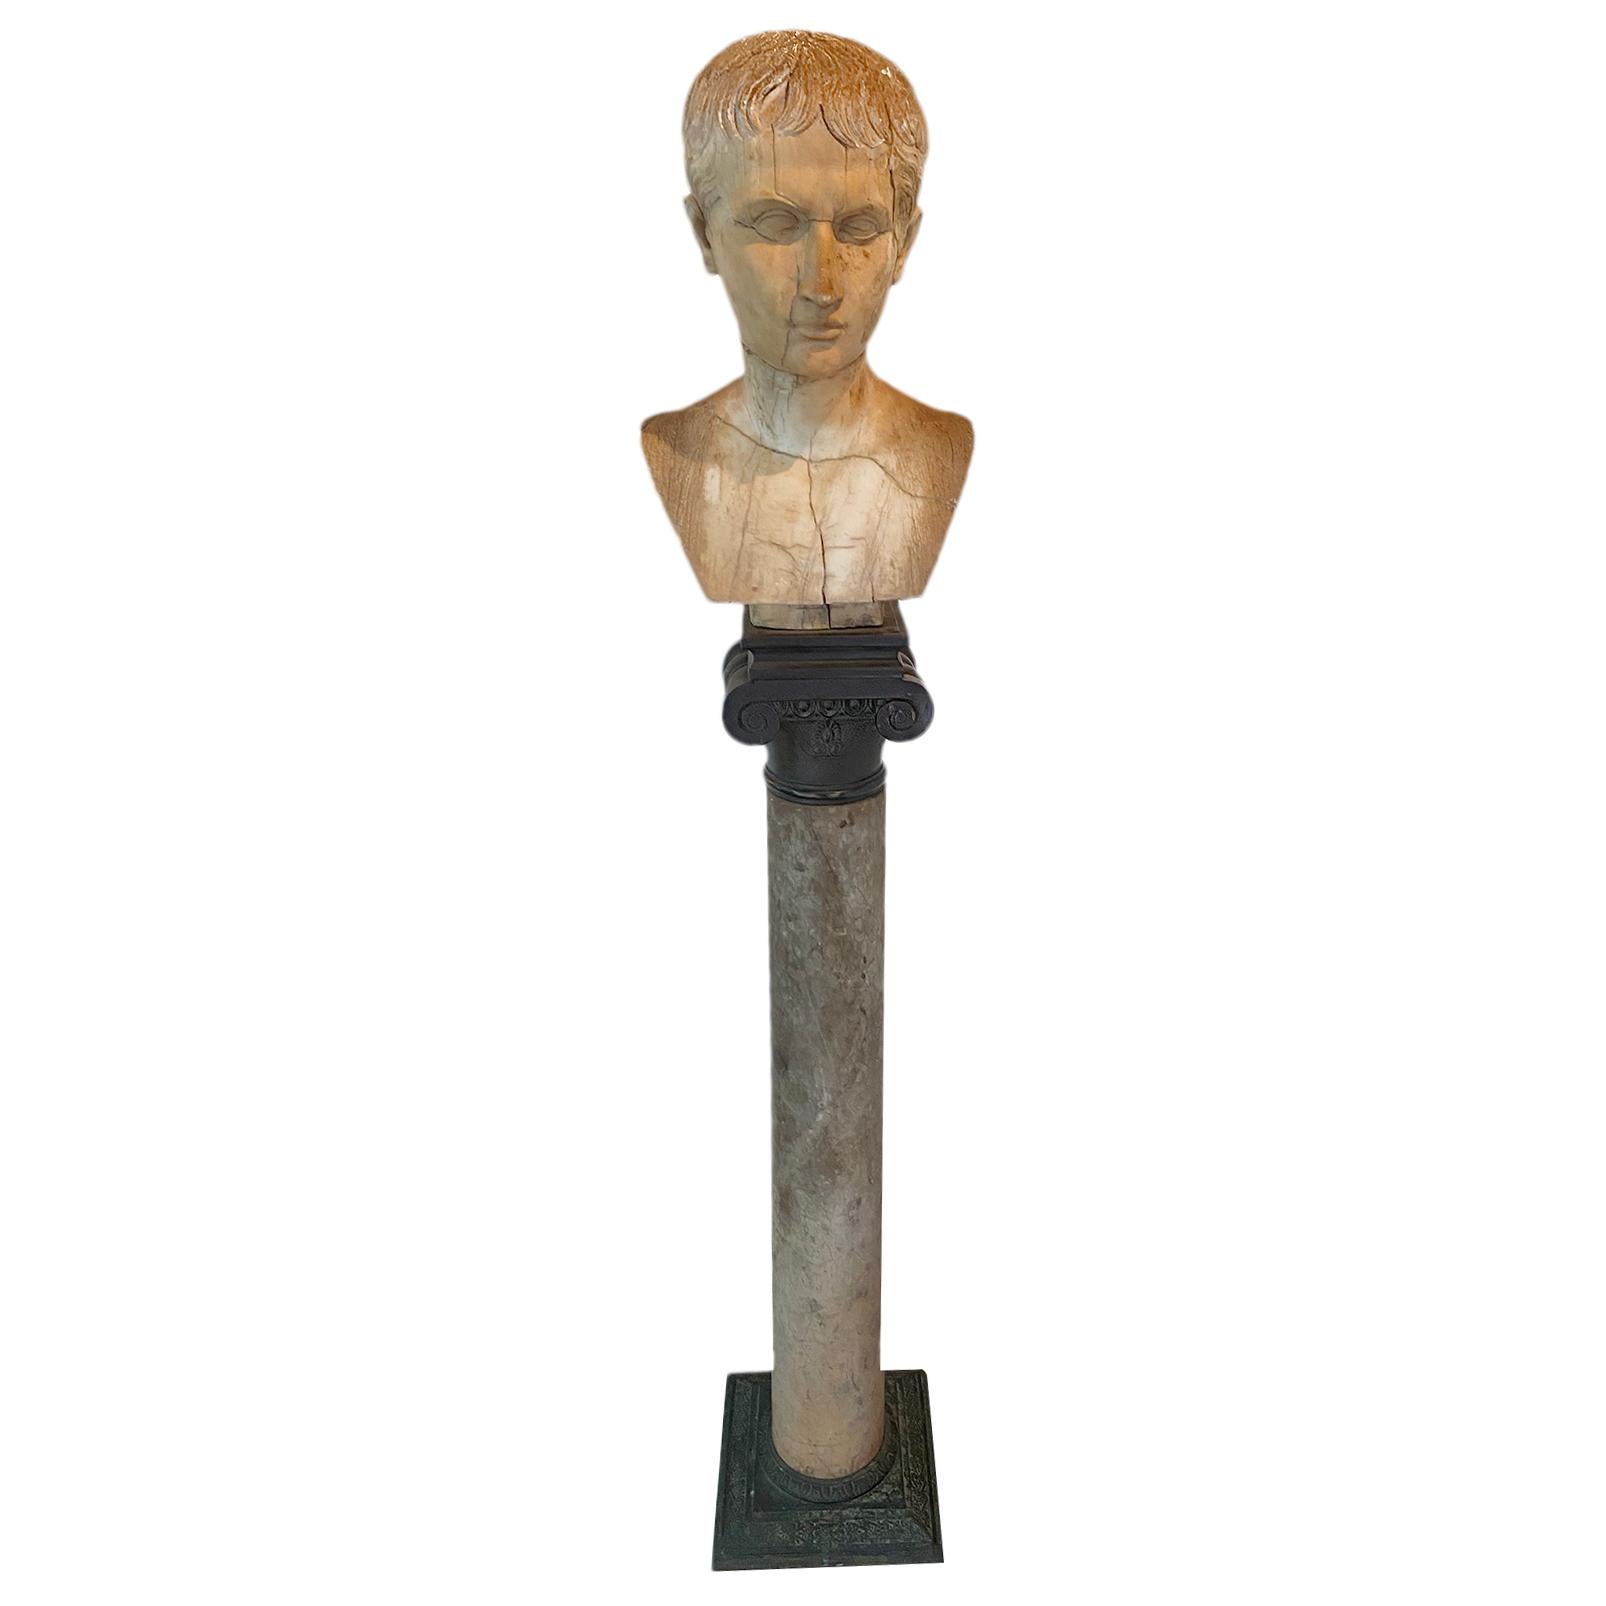 An early 19th century Italian carved marble bust of a young Caesar, sitting on an antique marble and bronze column base.

Measurements:
Total height 51.5